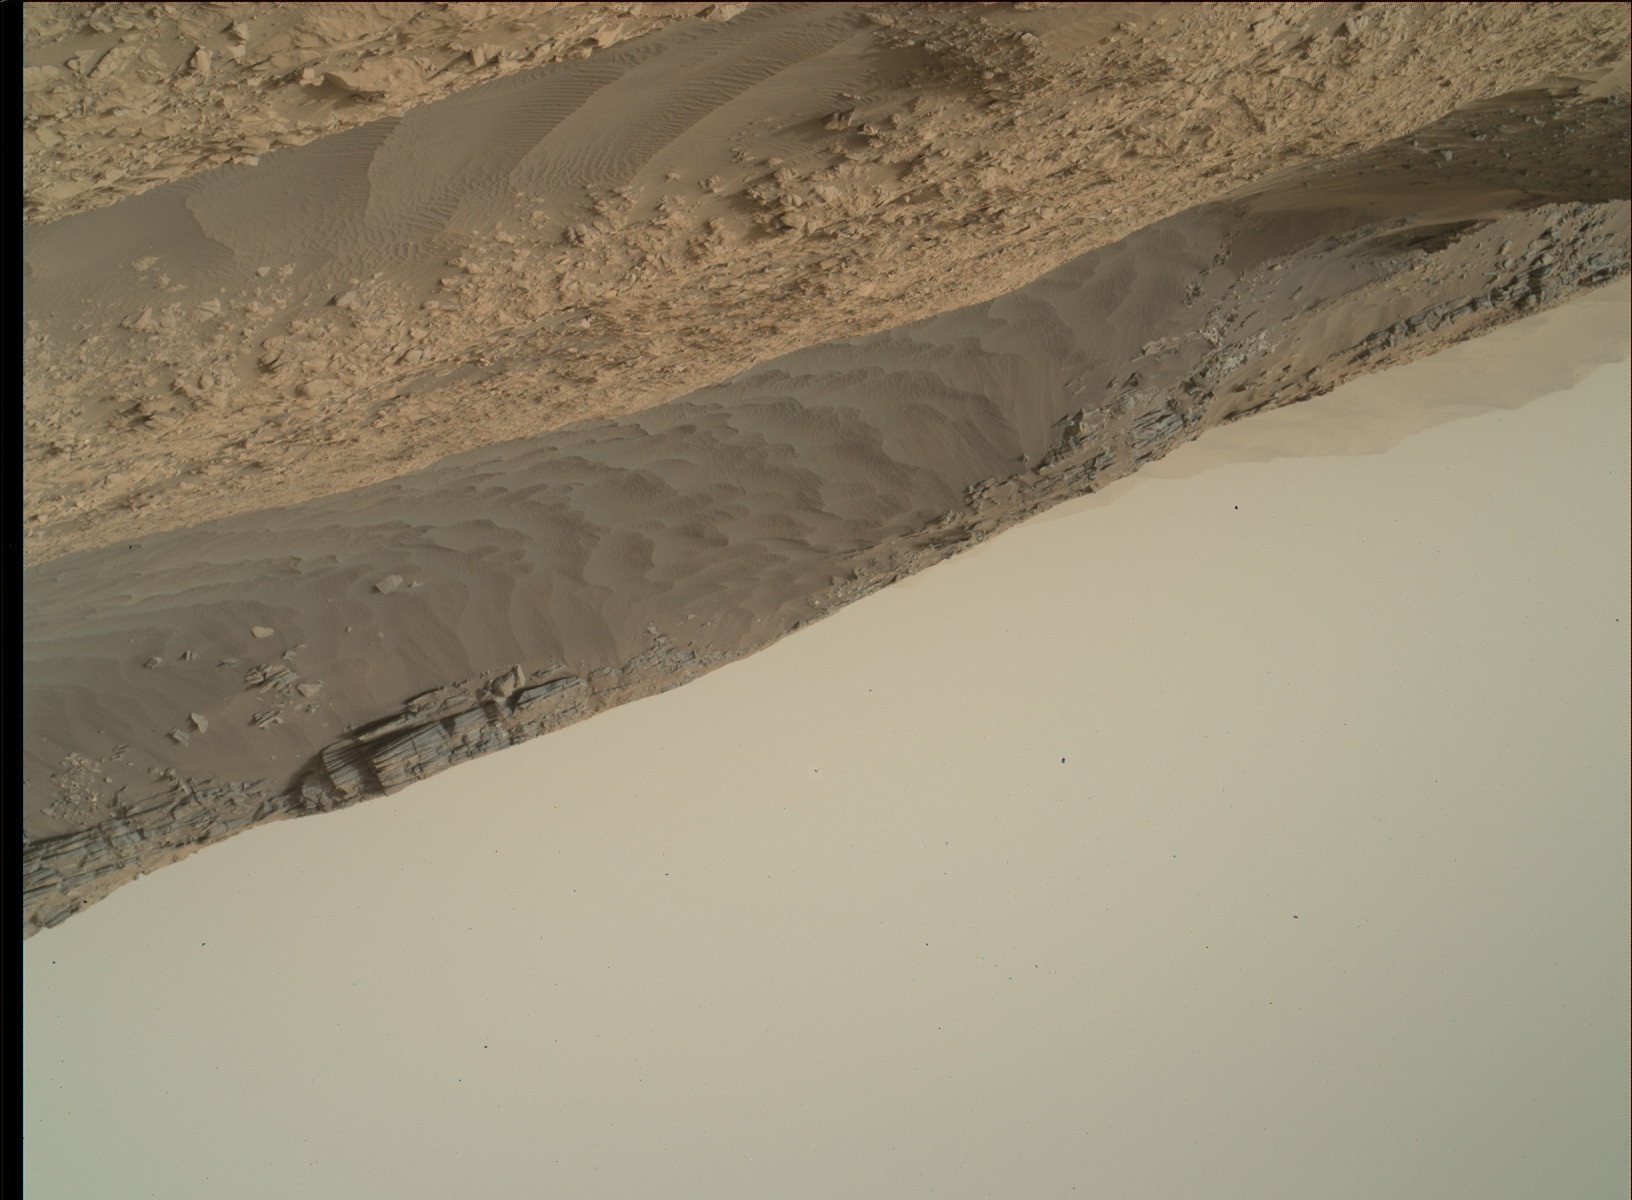 Nasa's Mars rover Curiosity acquired this image using its Mars Hand Lens Imager (MAHLI) on Sol 1378